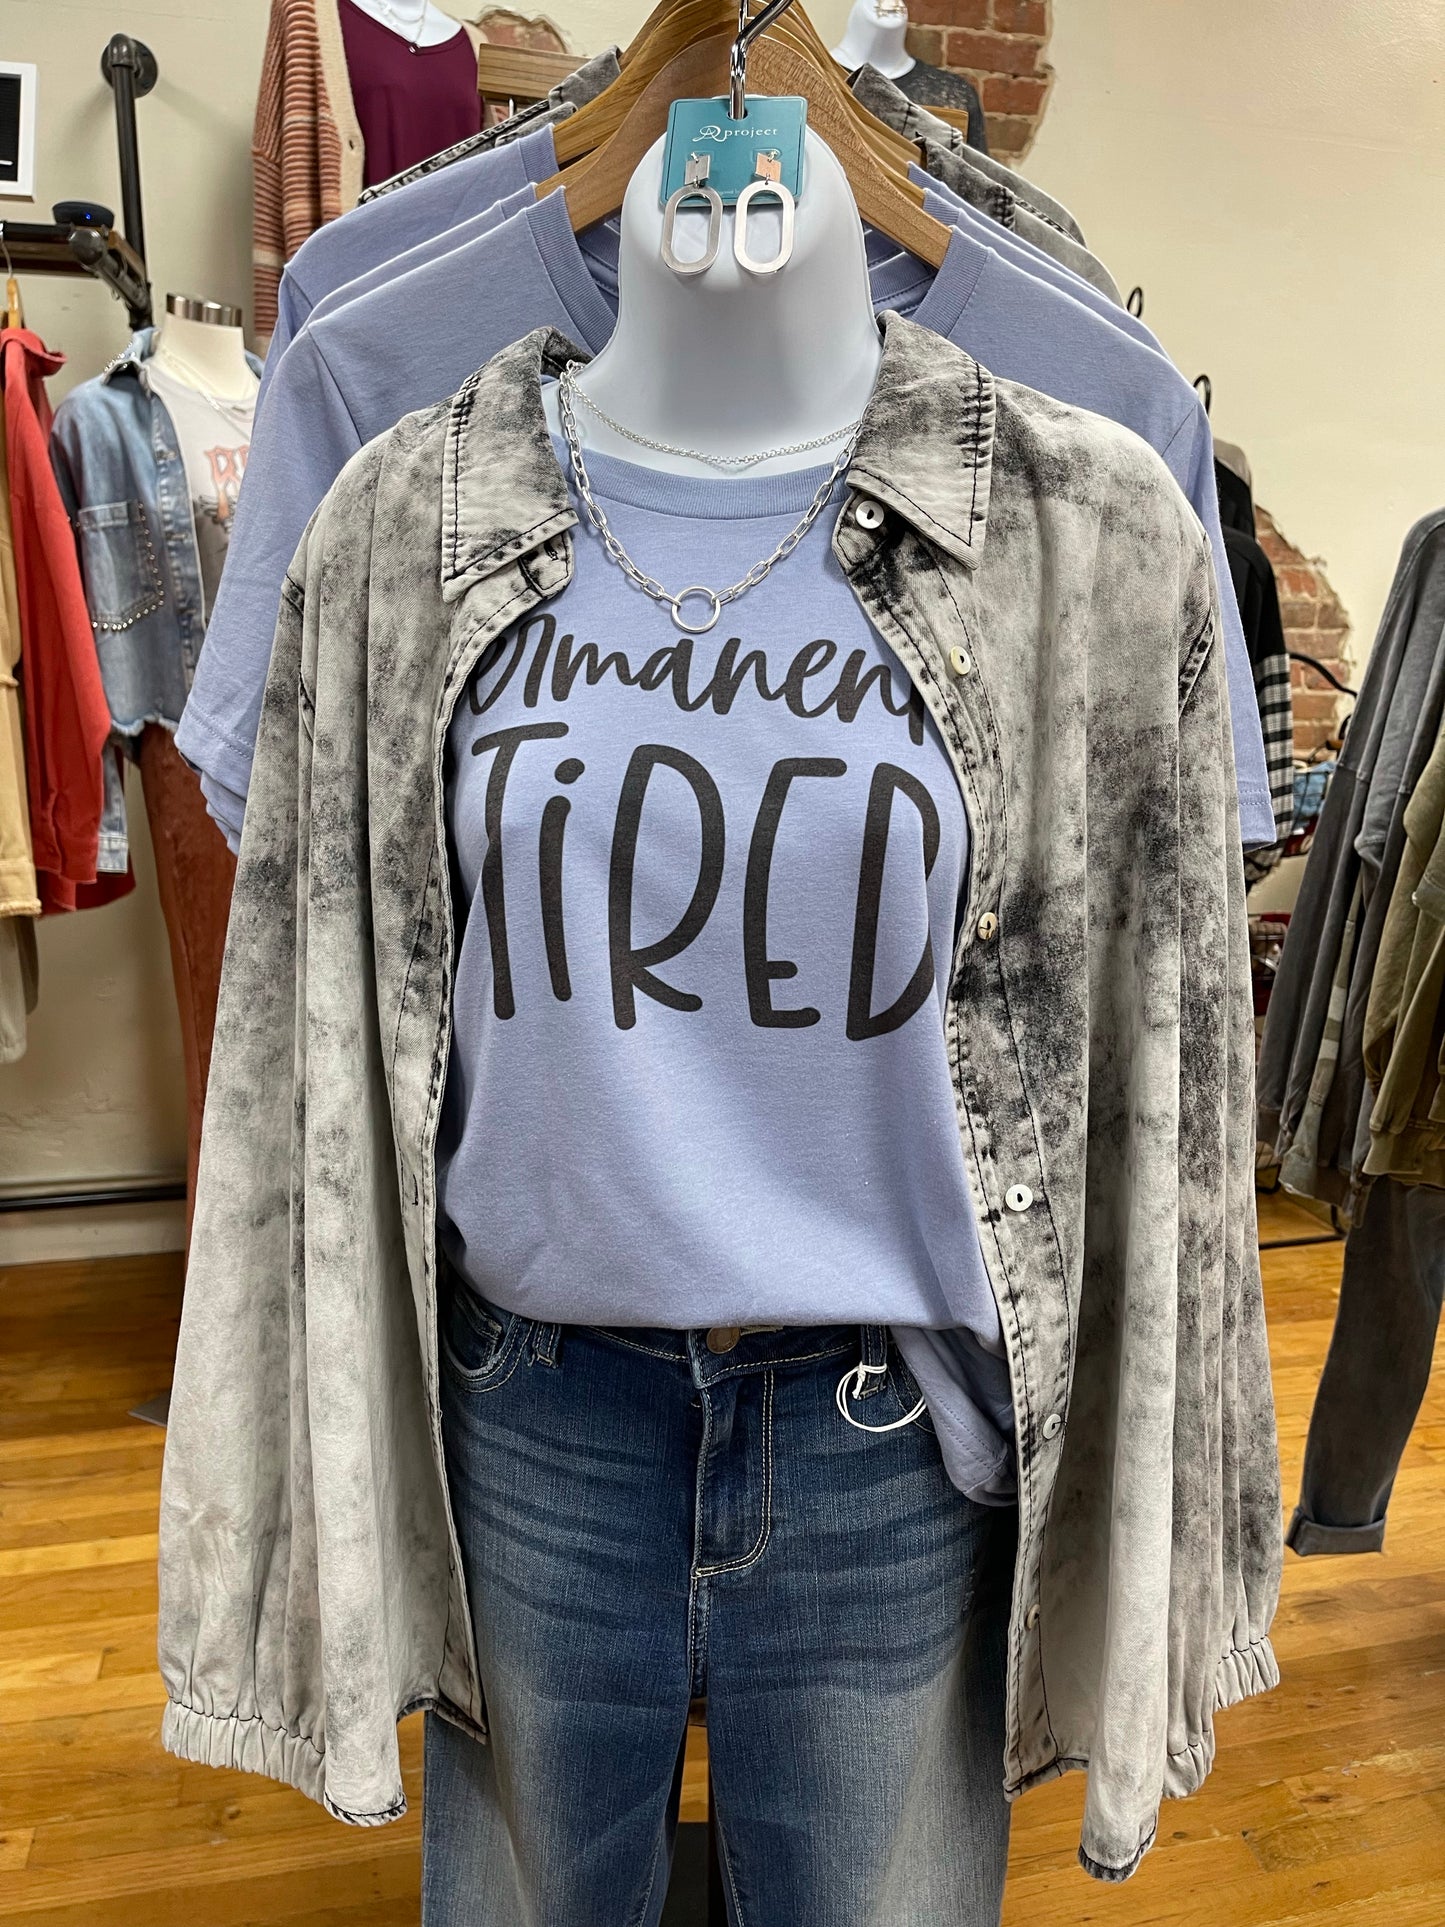 Permanently Tired Tee